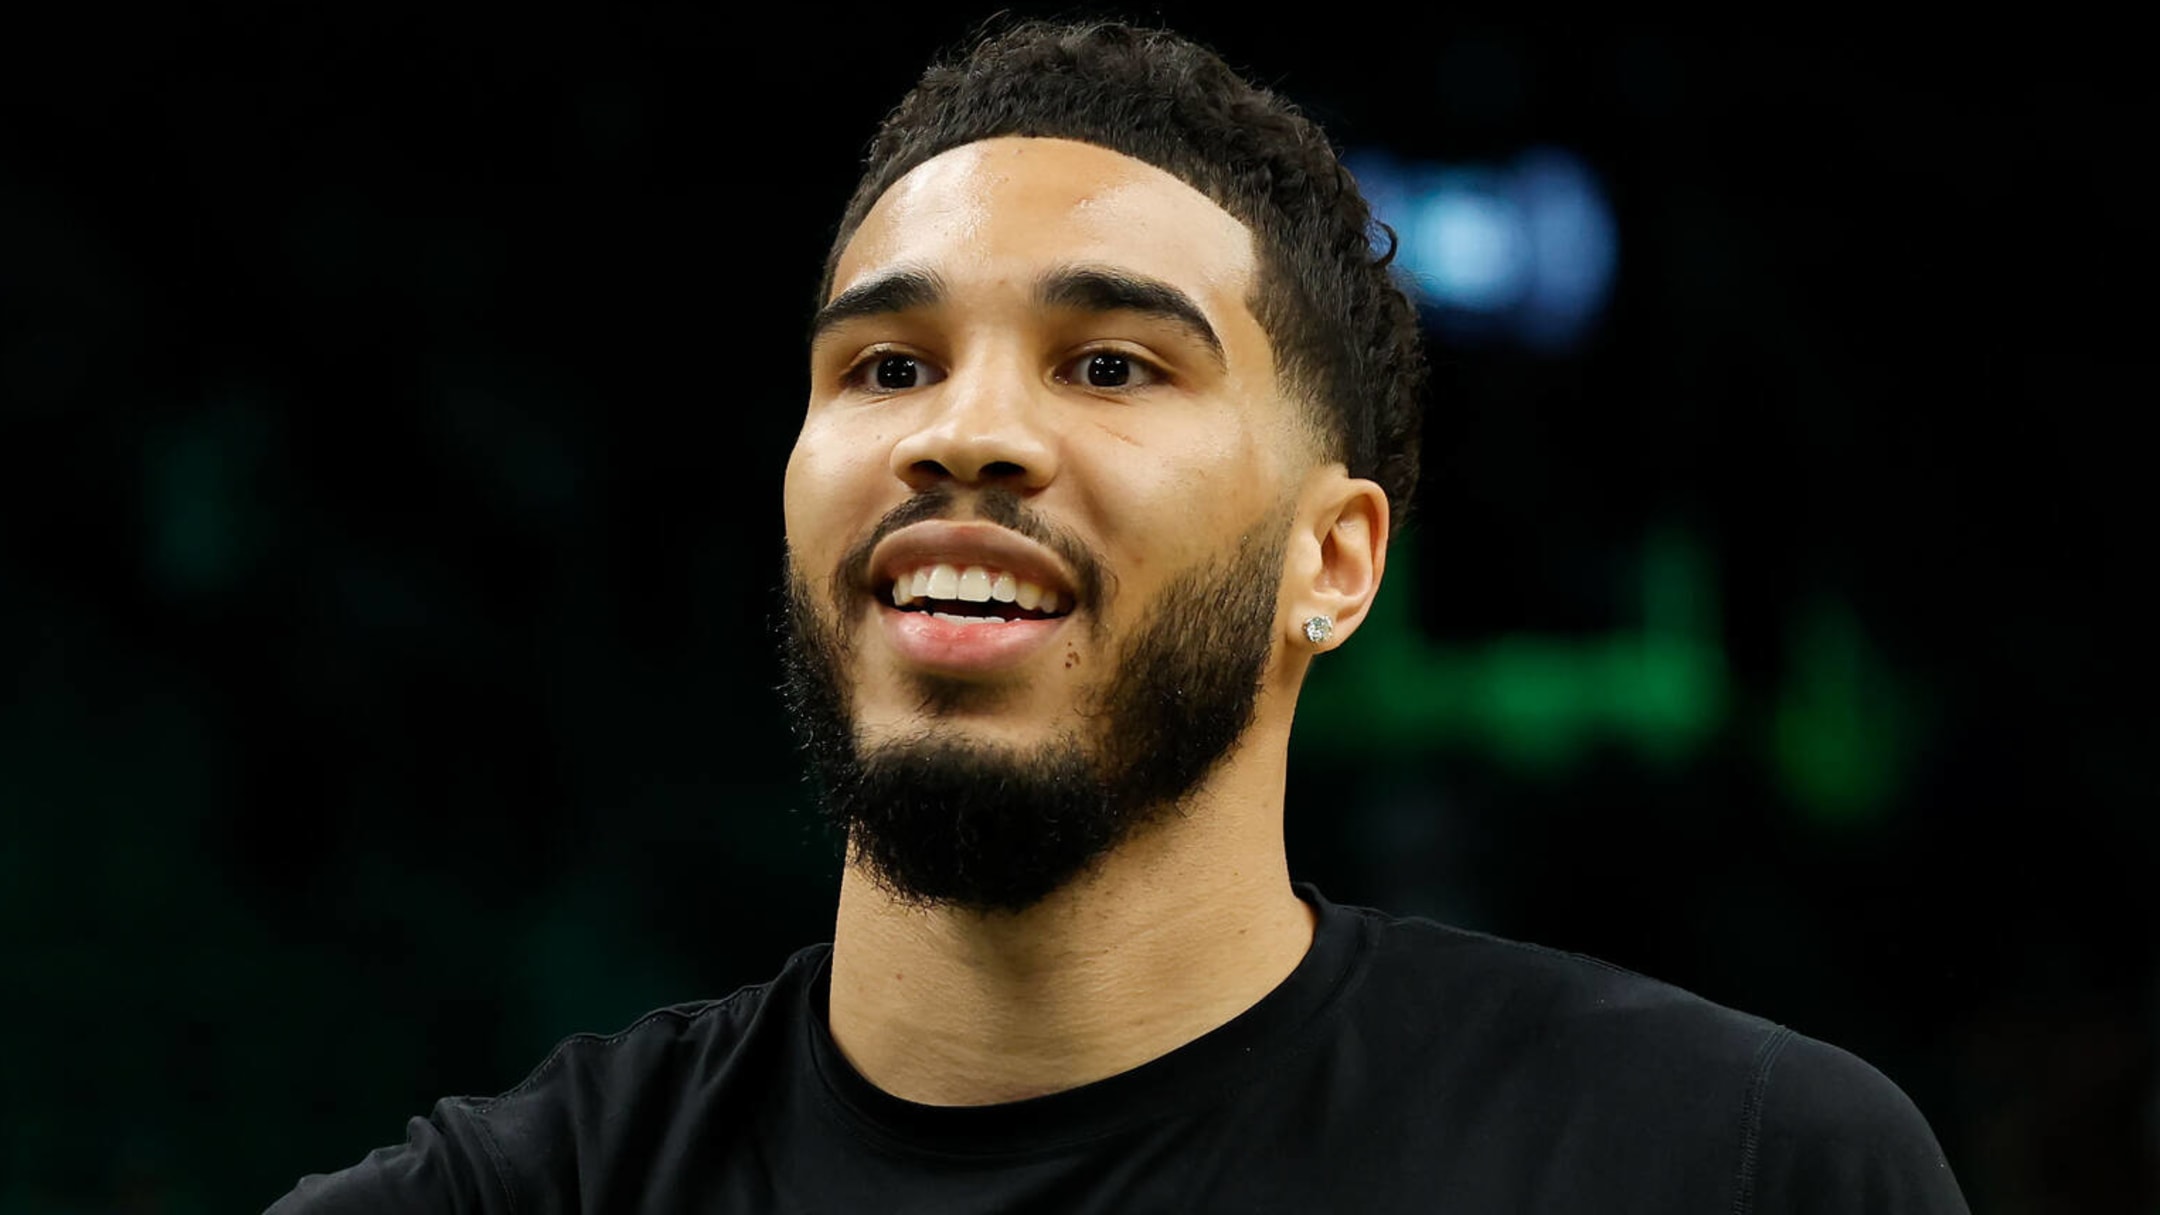 Nothing but love for Jayson Tatum! - St. Louis Cardinals